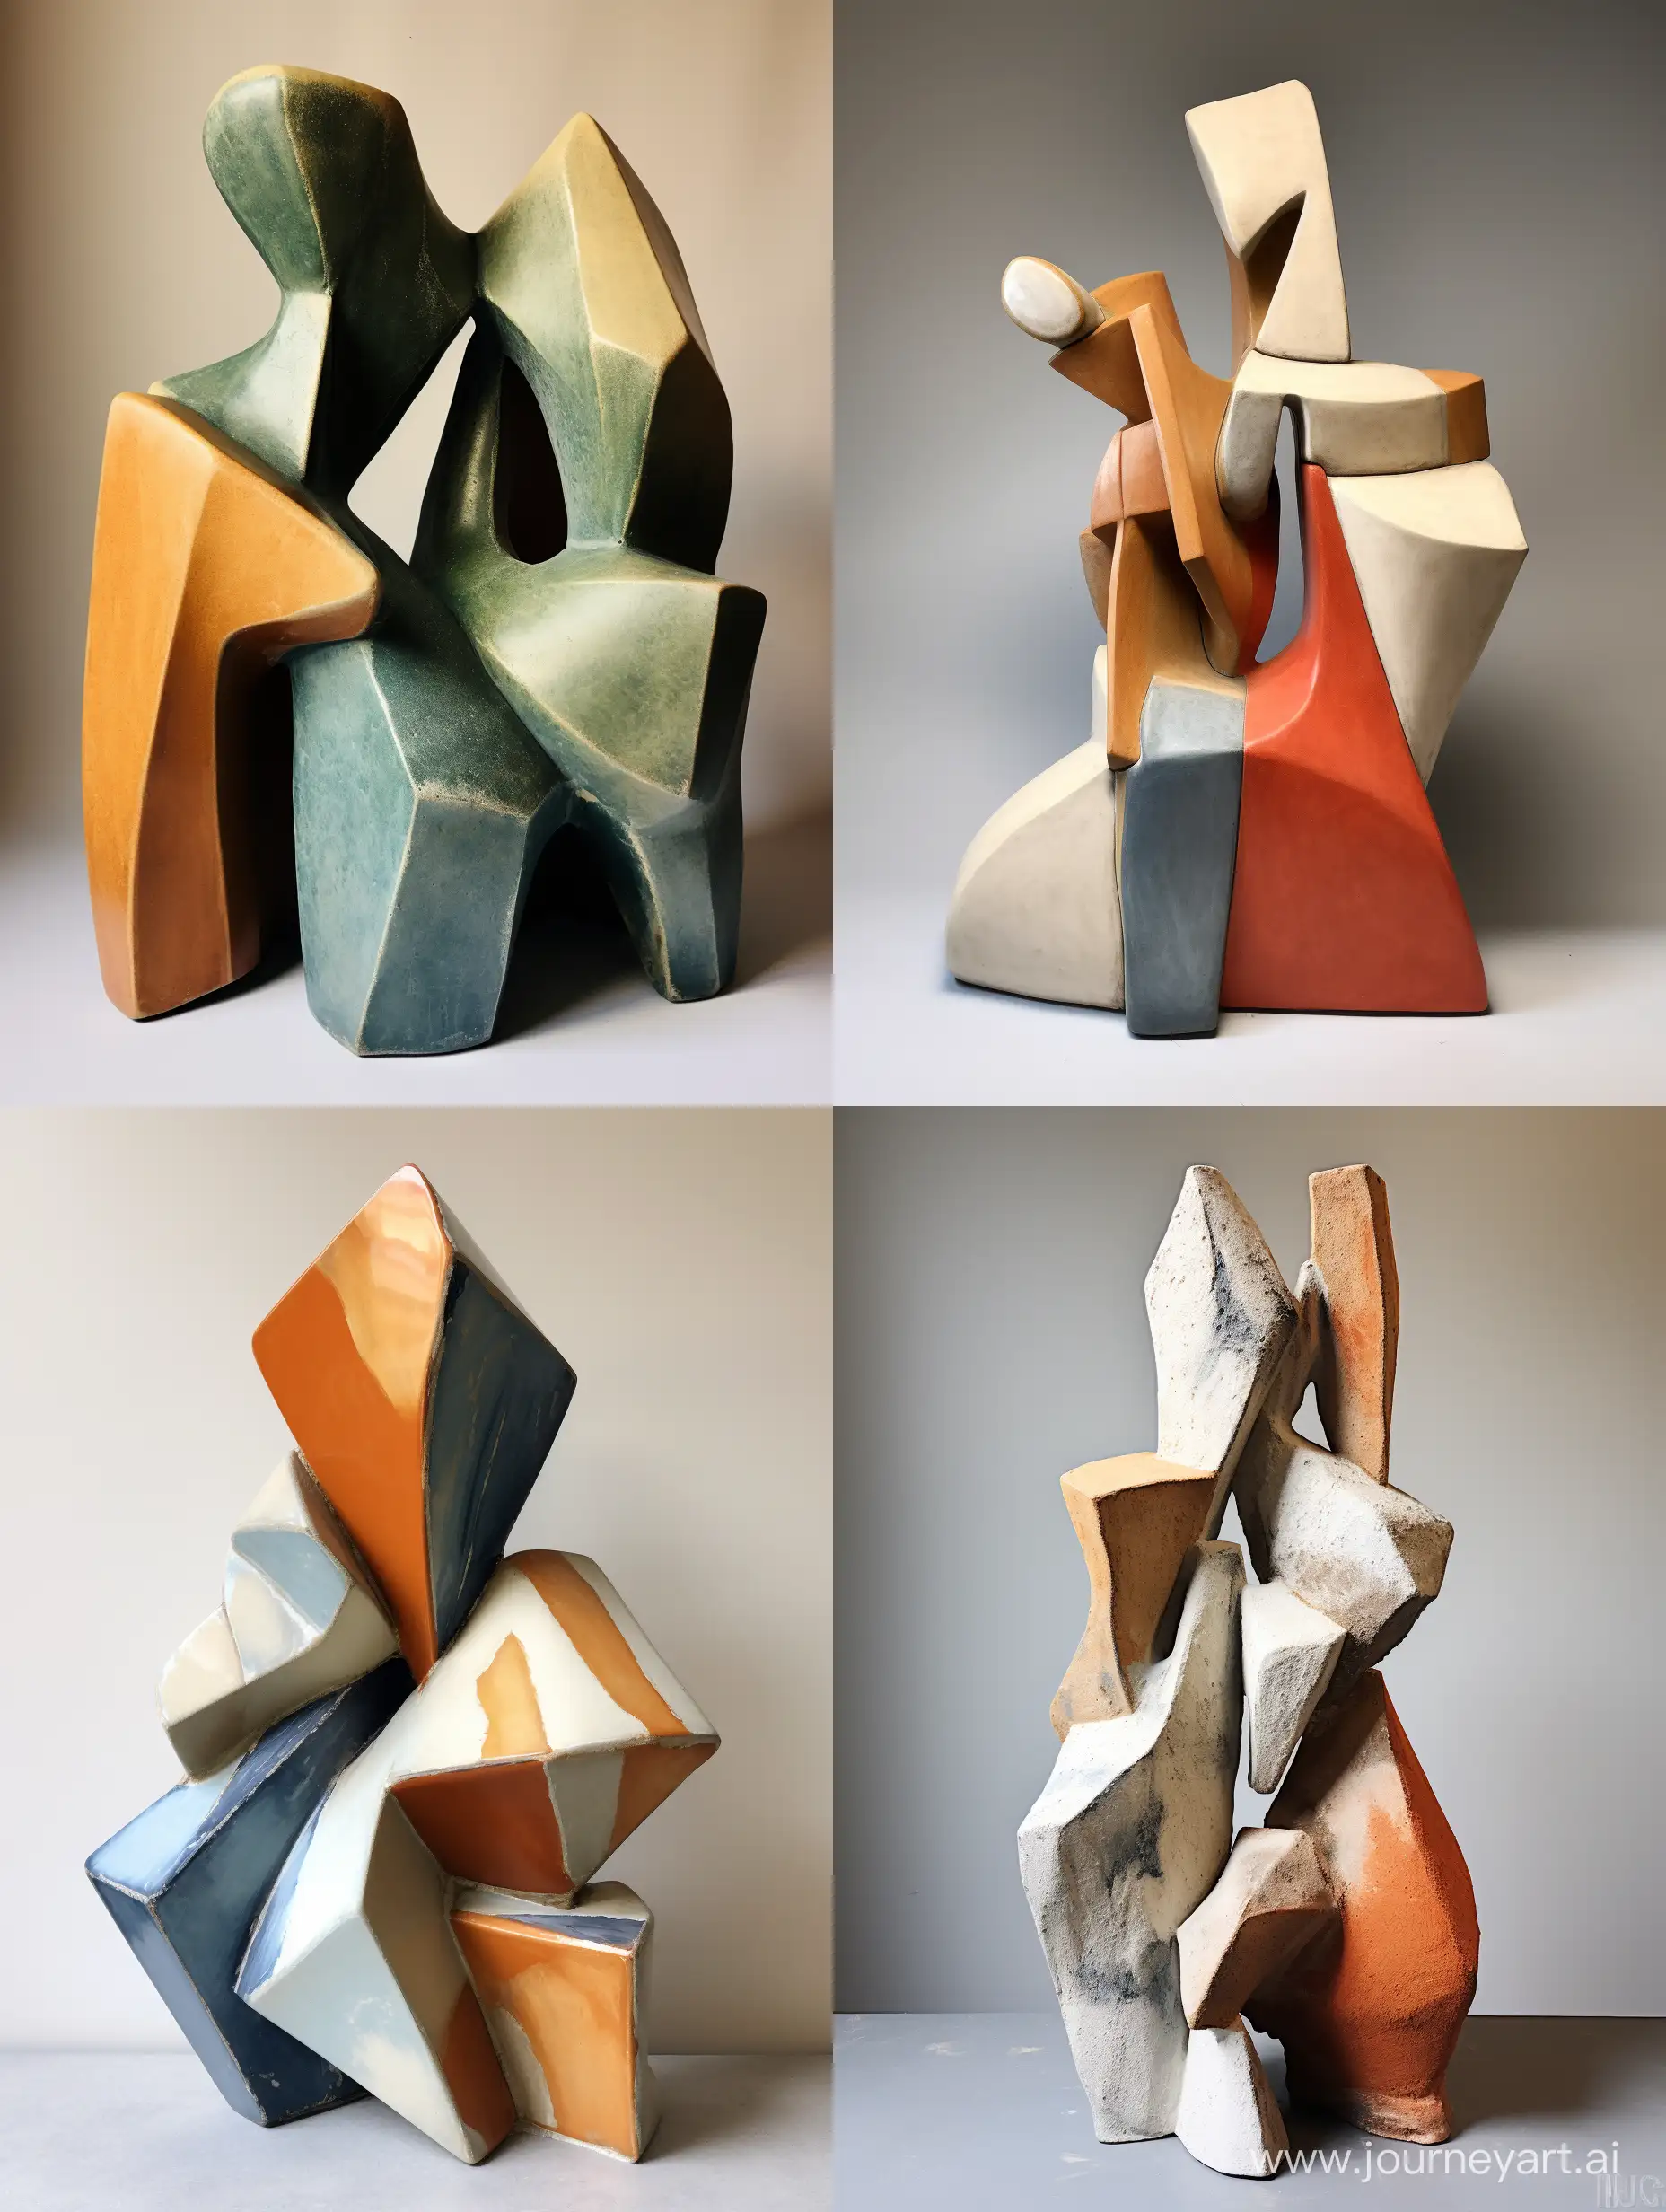 Modernist-60s-Geometric-Ceramic-Sculpture-with-Muted-Shades